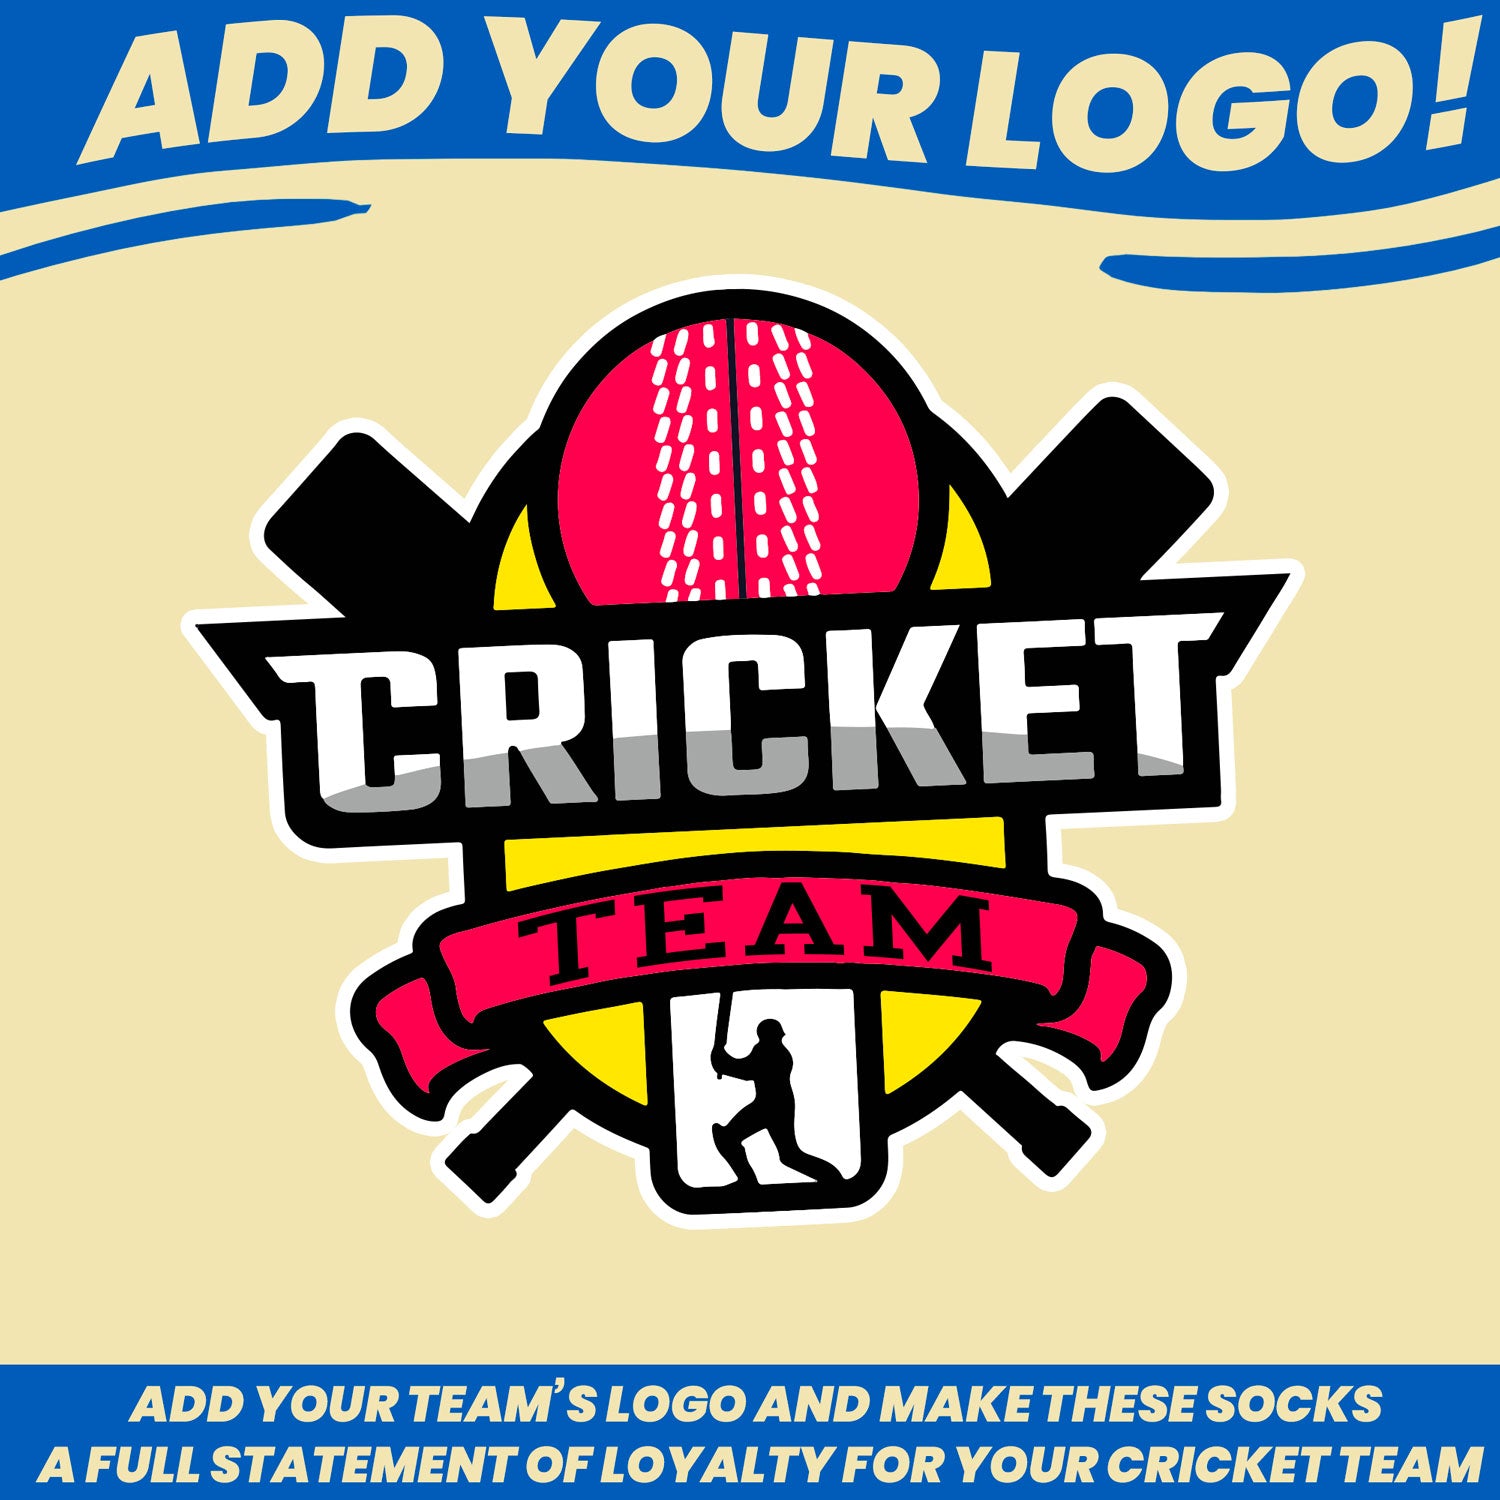 personalized cricket gift socks for team and coach feature to add your team&#39;s logo to the personalized sockspersonalized cricket gift socks for team and coach feature to add your team&#39;s logo to the personalized socks